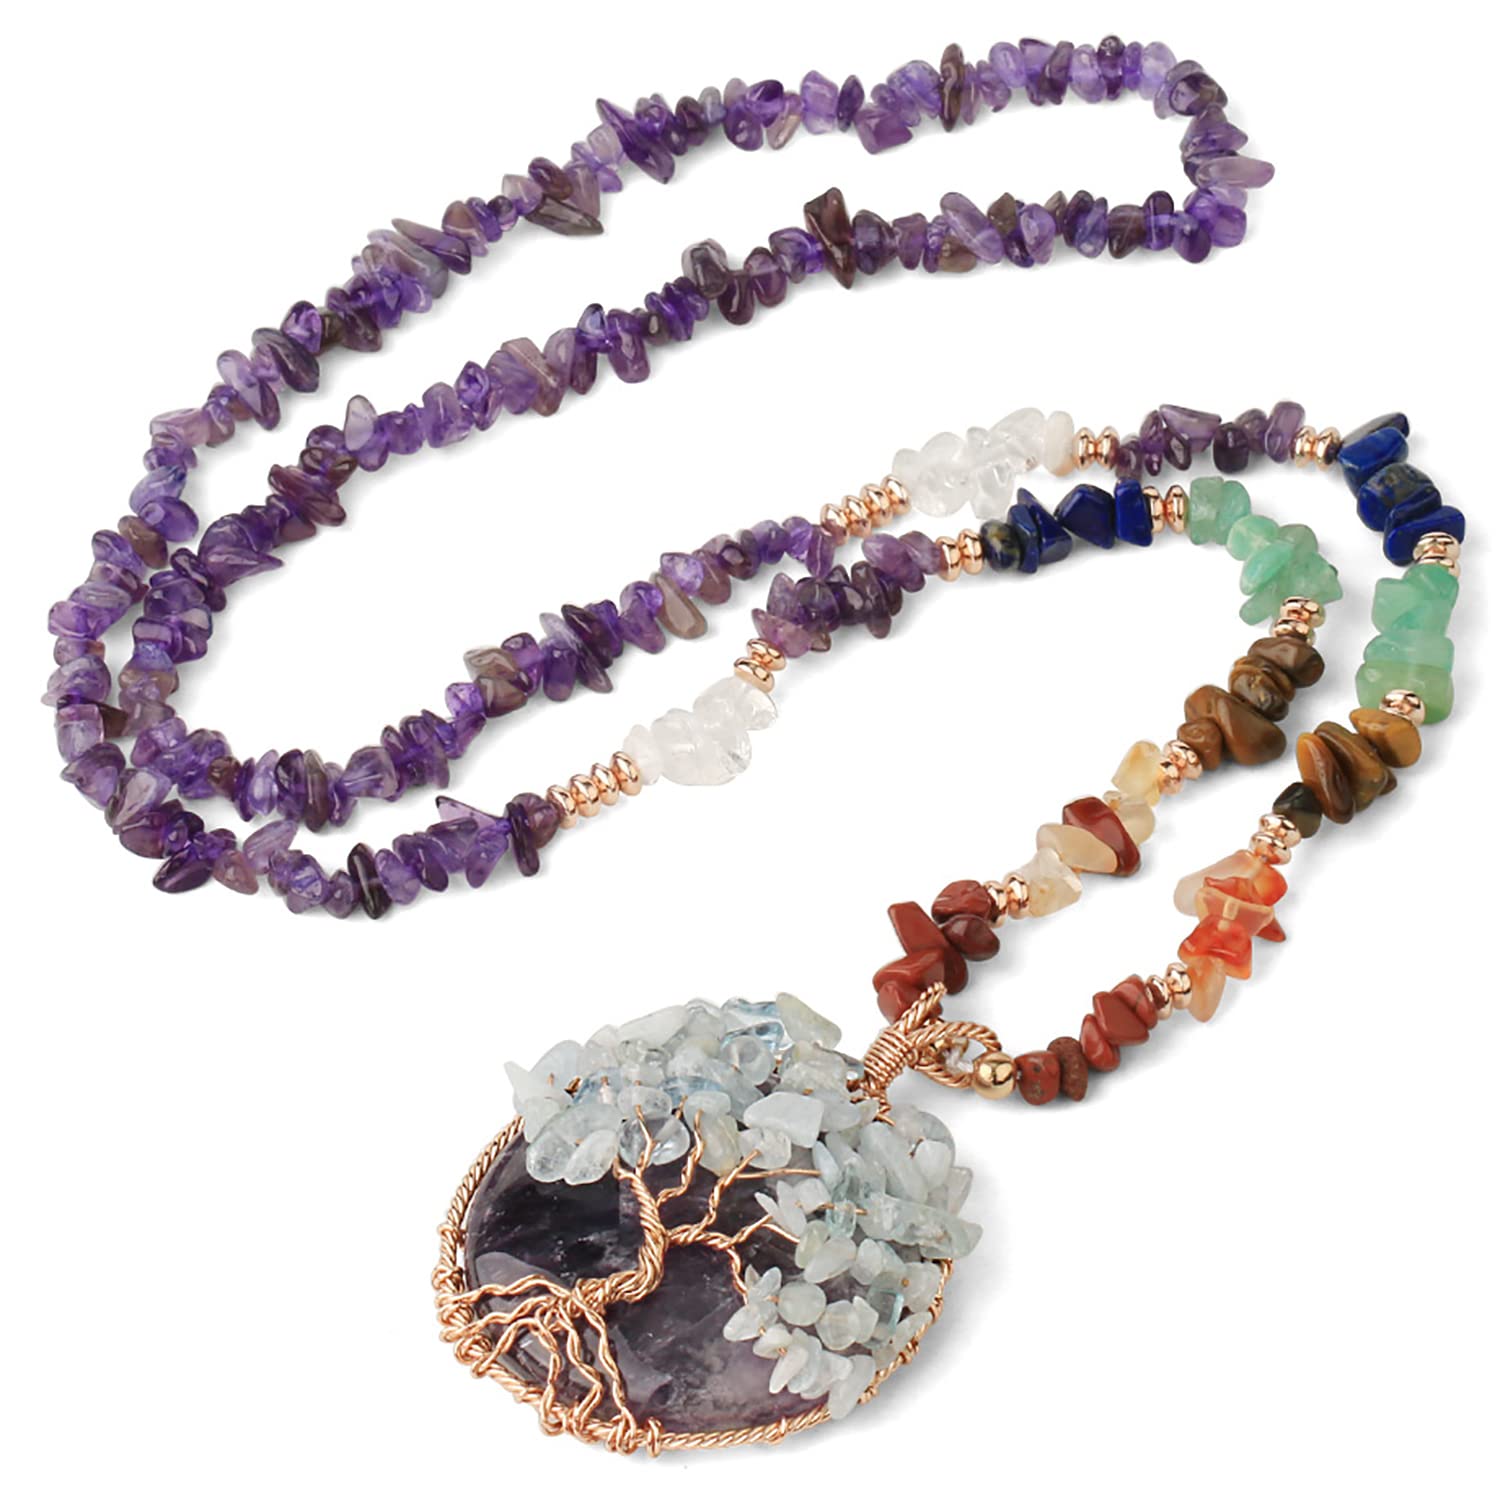 Spiritual Tree of Life Ladies Necklace - Natural Stone Wire Wrap Pendant for Women - Chakra Reiki Stone Chips with Circular Gemstone Amulet - Supplied with Jewellery Gift Box